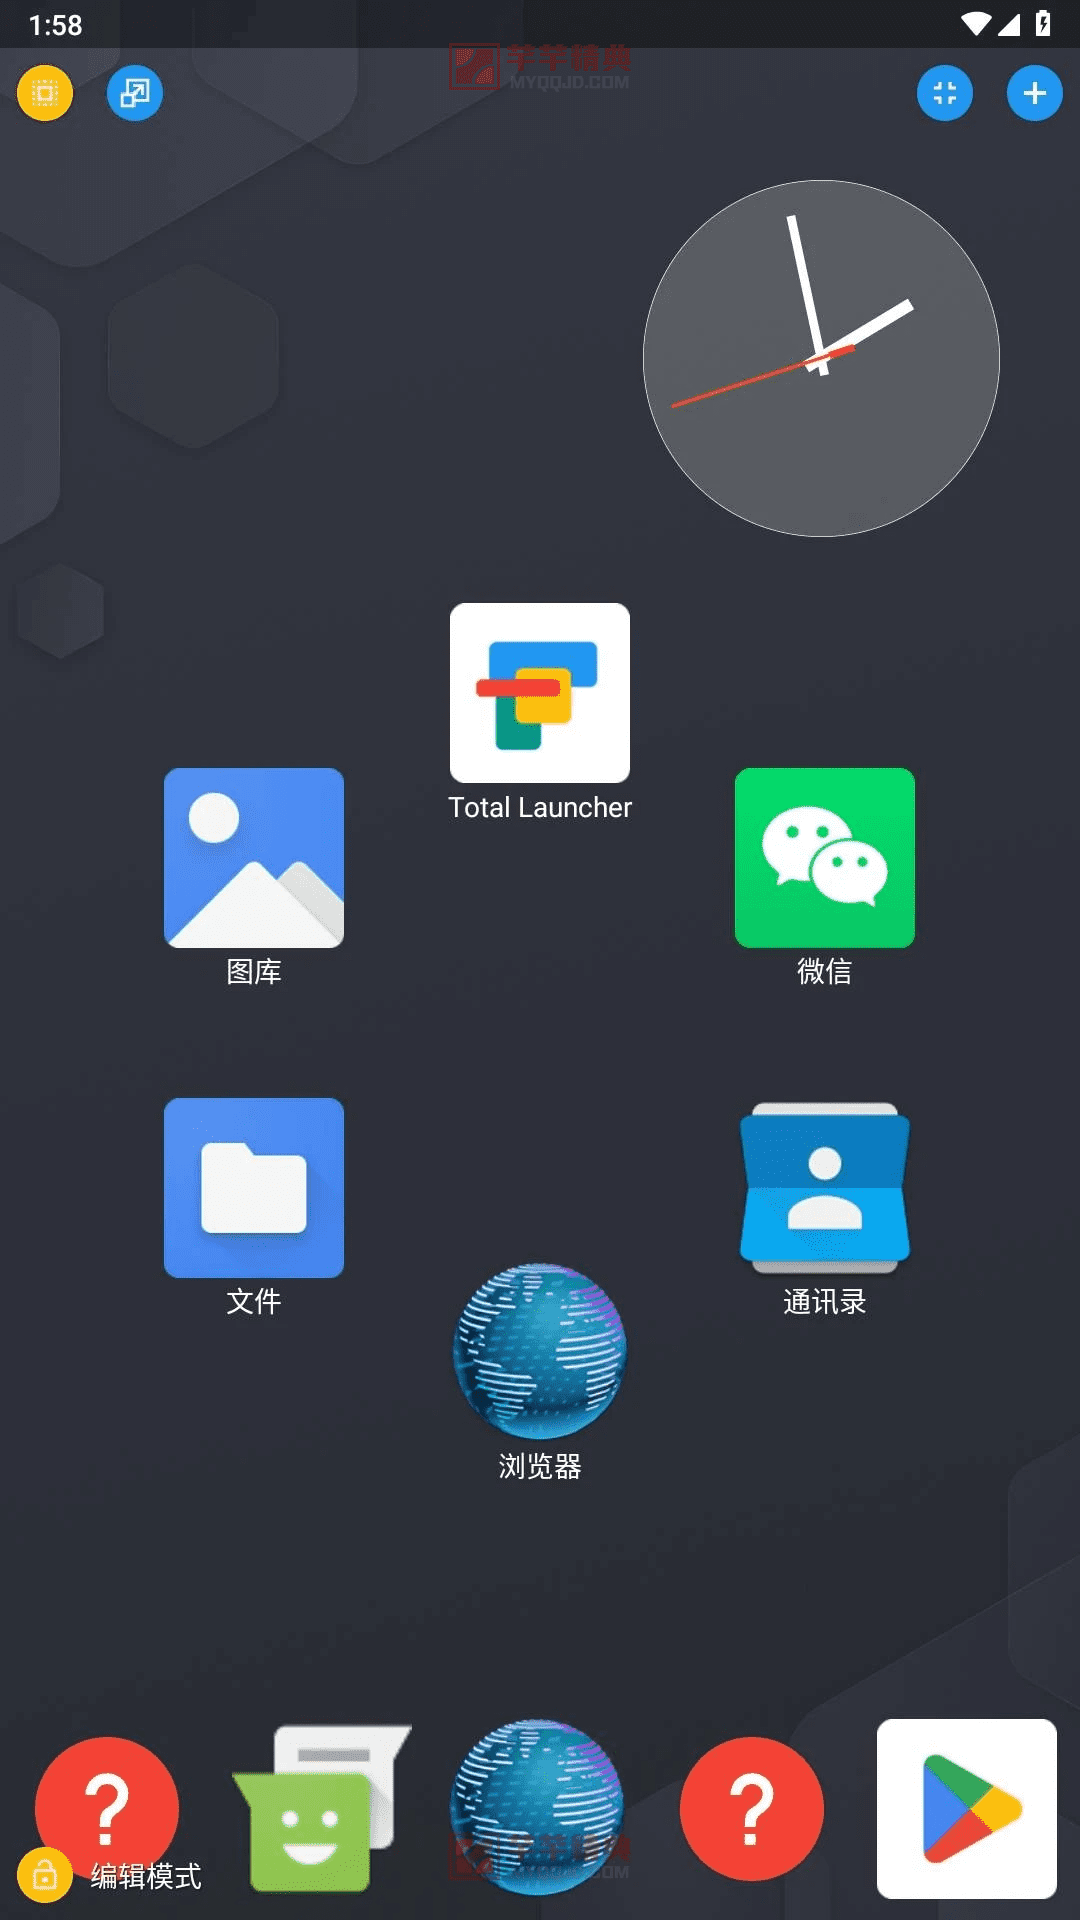 Total Launcher v2.10.5 for Android 解锁专业版